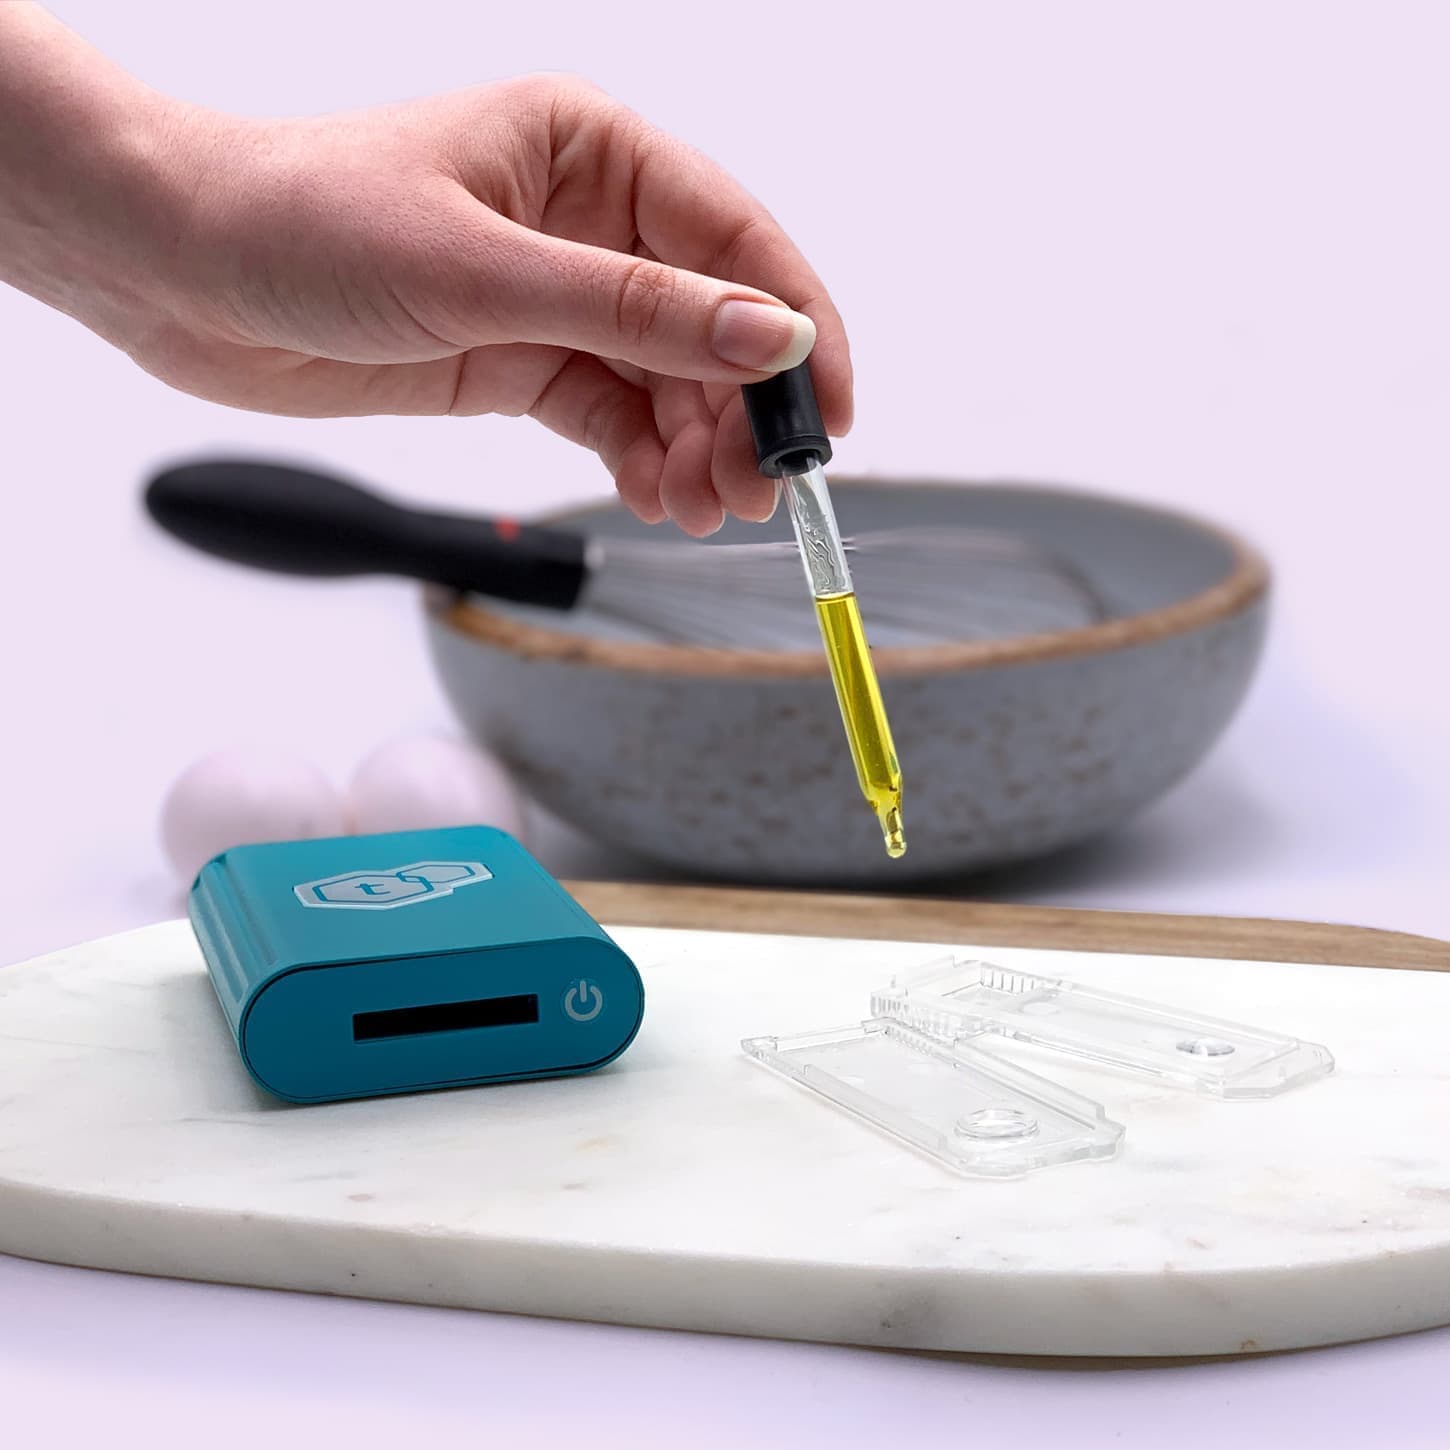 Flawlessly Dosed Edibles - Ensure accurate dosing with the LĒVO II x tCheck Potency Tester Bundle